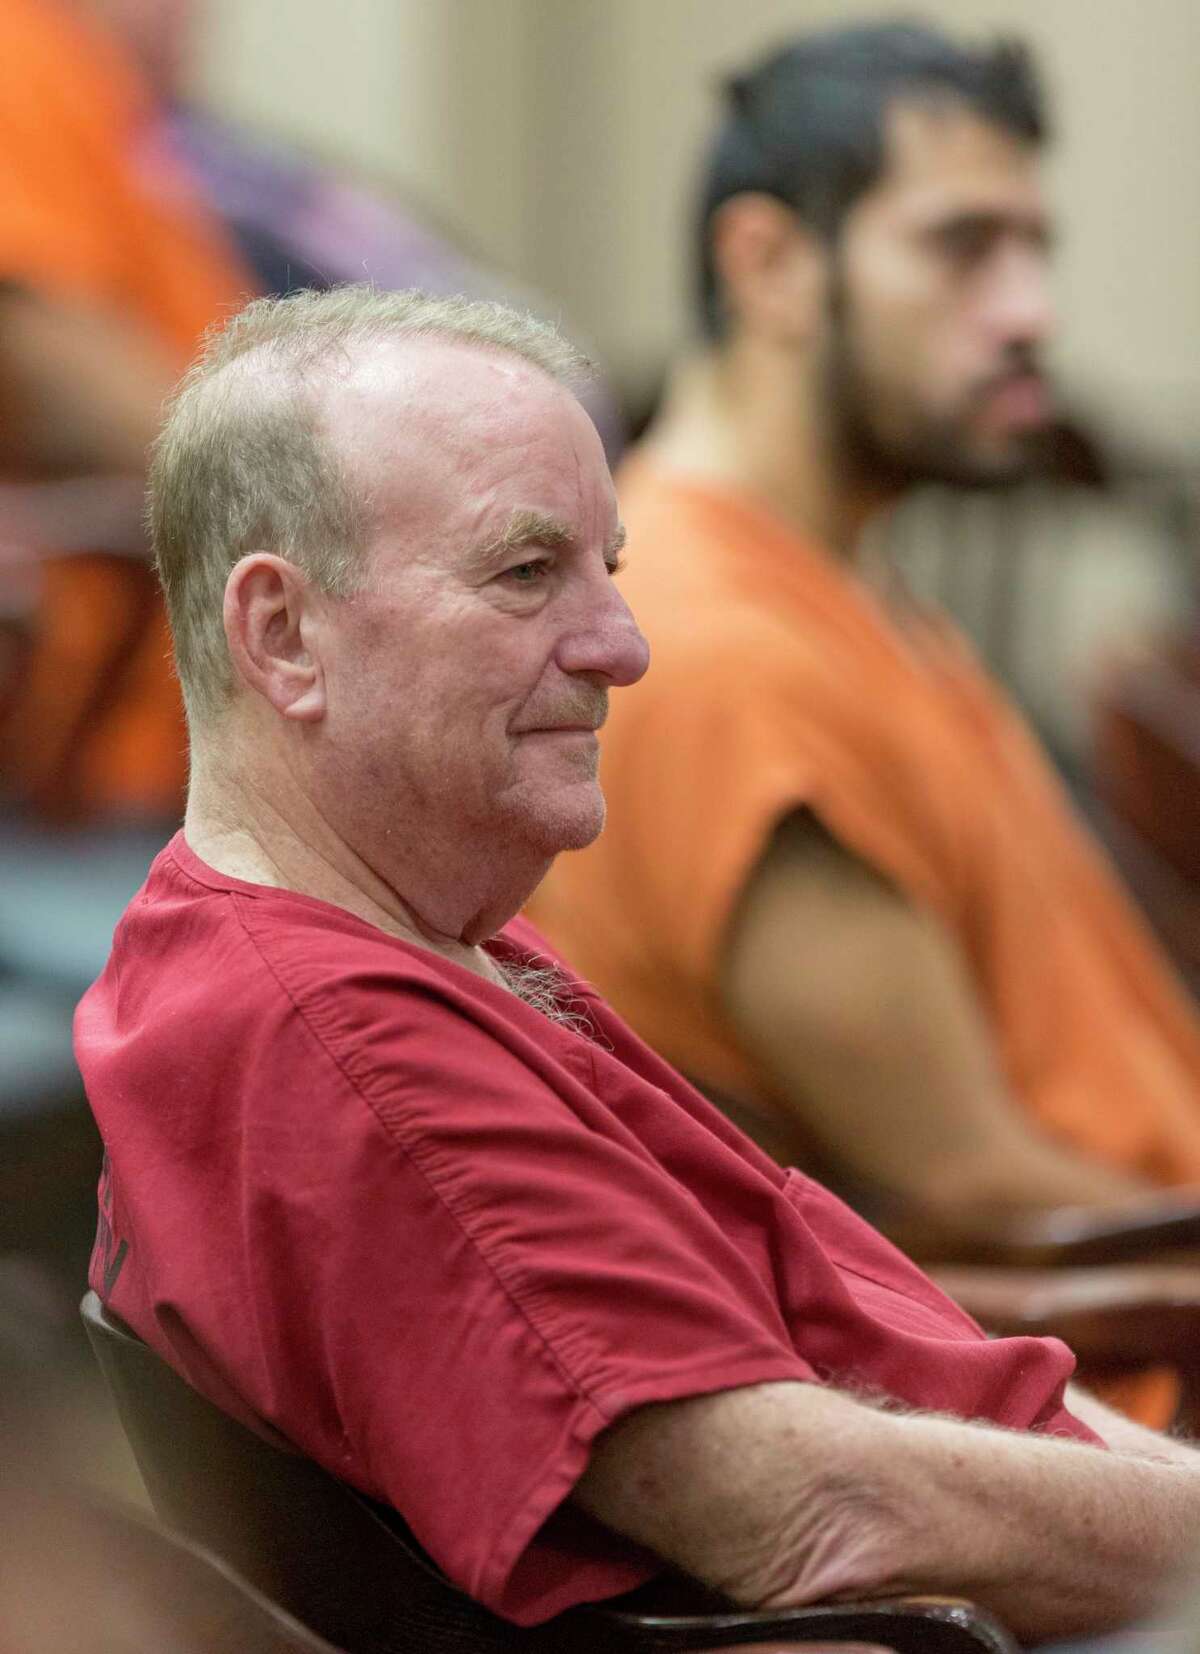 Convicted child pornographer John Morgan Campbell, the former H-E-B executive credited with coming up with the concept of Central Market, sits Tuesday, June, 26, 2018 in the 175th state District Court before appearing in front of Judge Catherine Torres-Stahl to request his 10 year prison sentence be converted to shock probation. Torres-Stahl denied the request. Shock probation is a provision in the Texas Code of Criminal Procedure that allows a judge to temporarily send a defendant to prison or jail before returning them to the court to sentence them to community supervision.